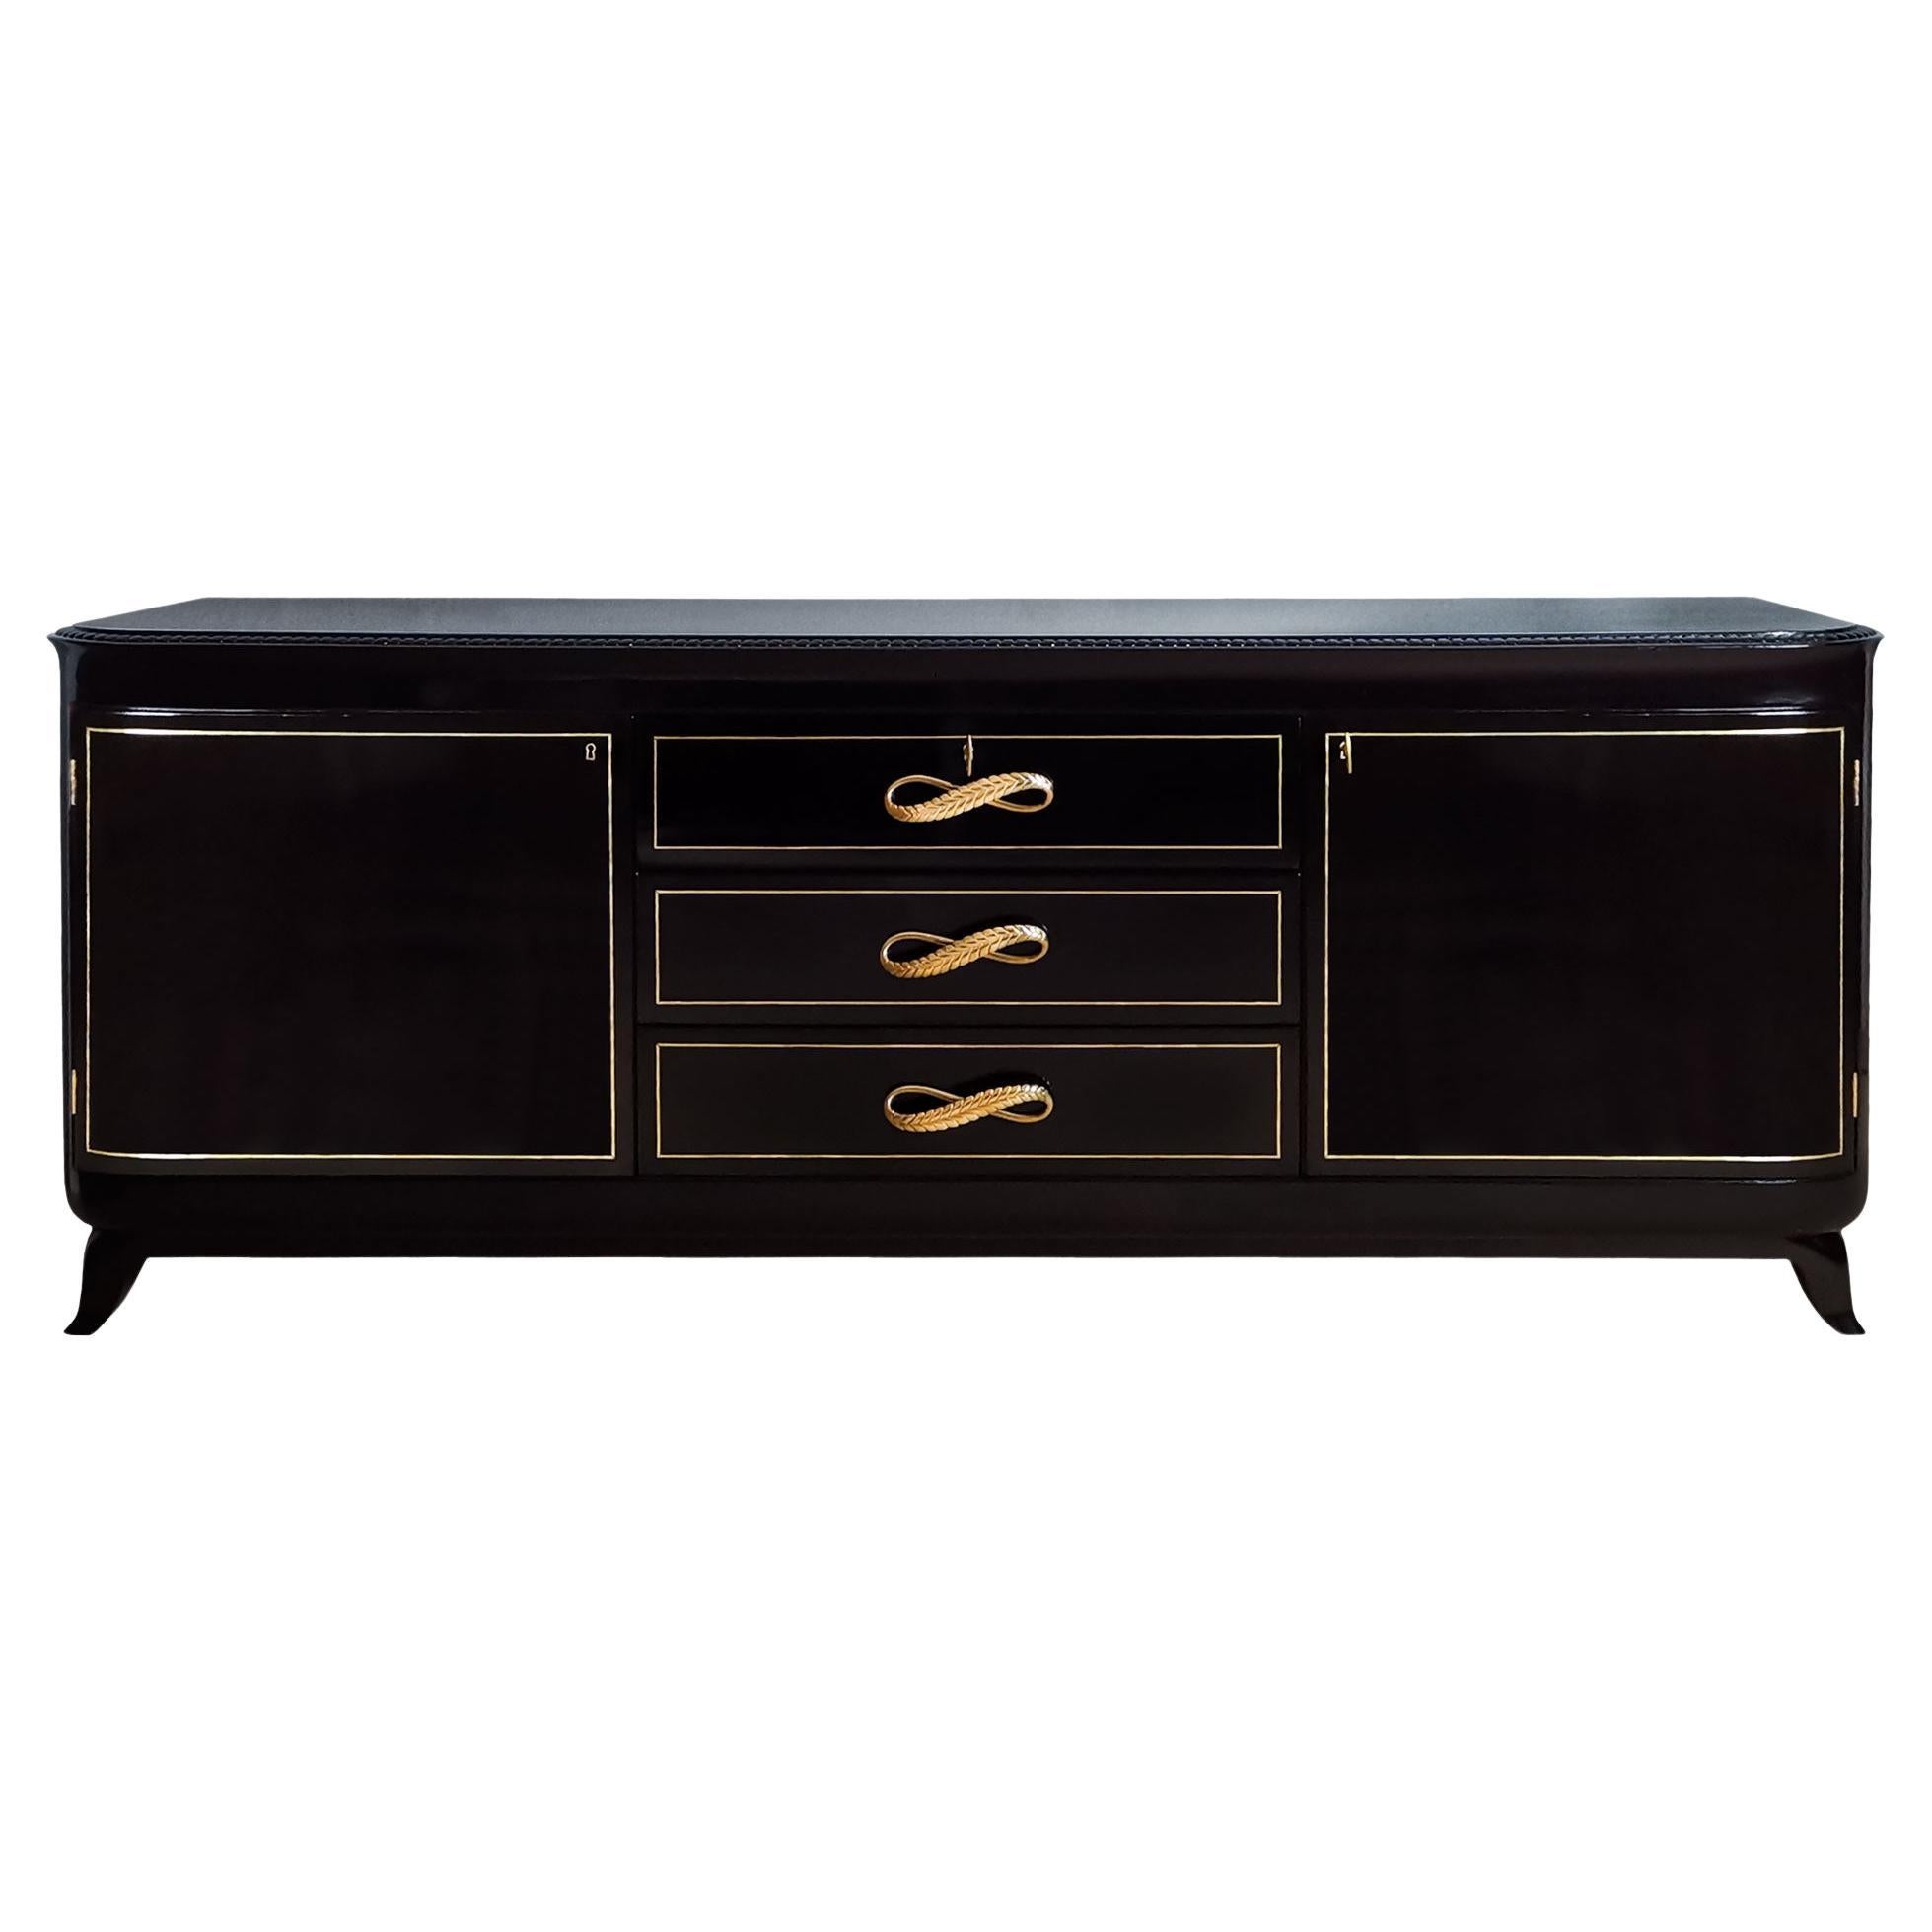 Mid-Century Modern Sideboard - Chest of Drawers in Dark Solid Wood – Italy 1940